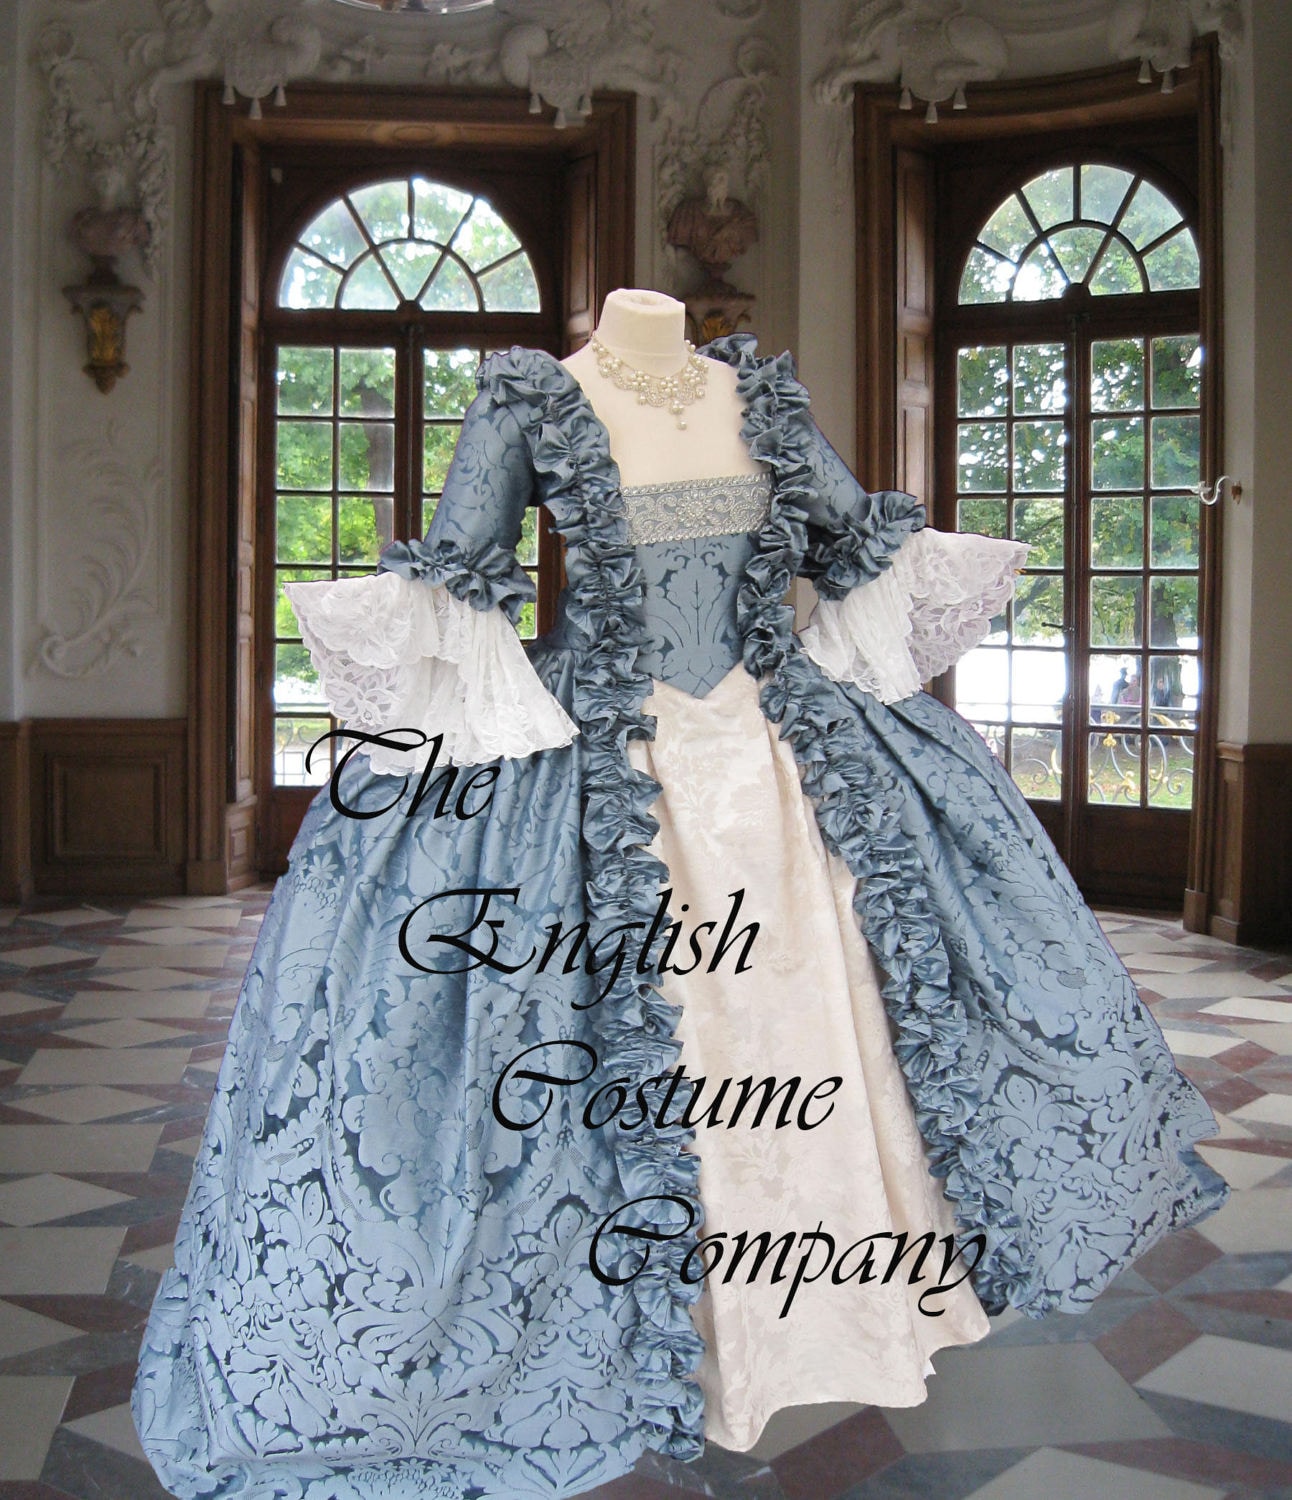 Woman's Dress (Open Robe) | 18th century clothing, Historical dresses, 18th  century fashion